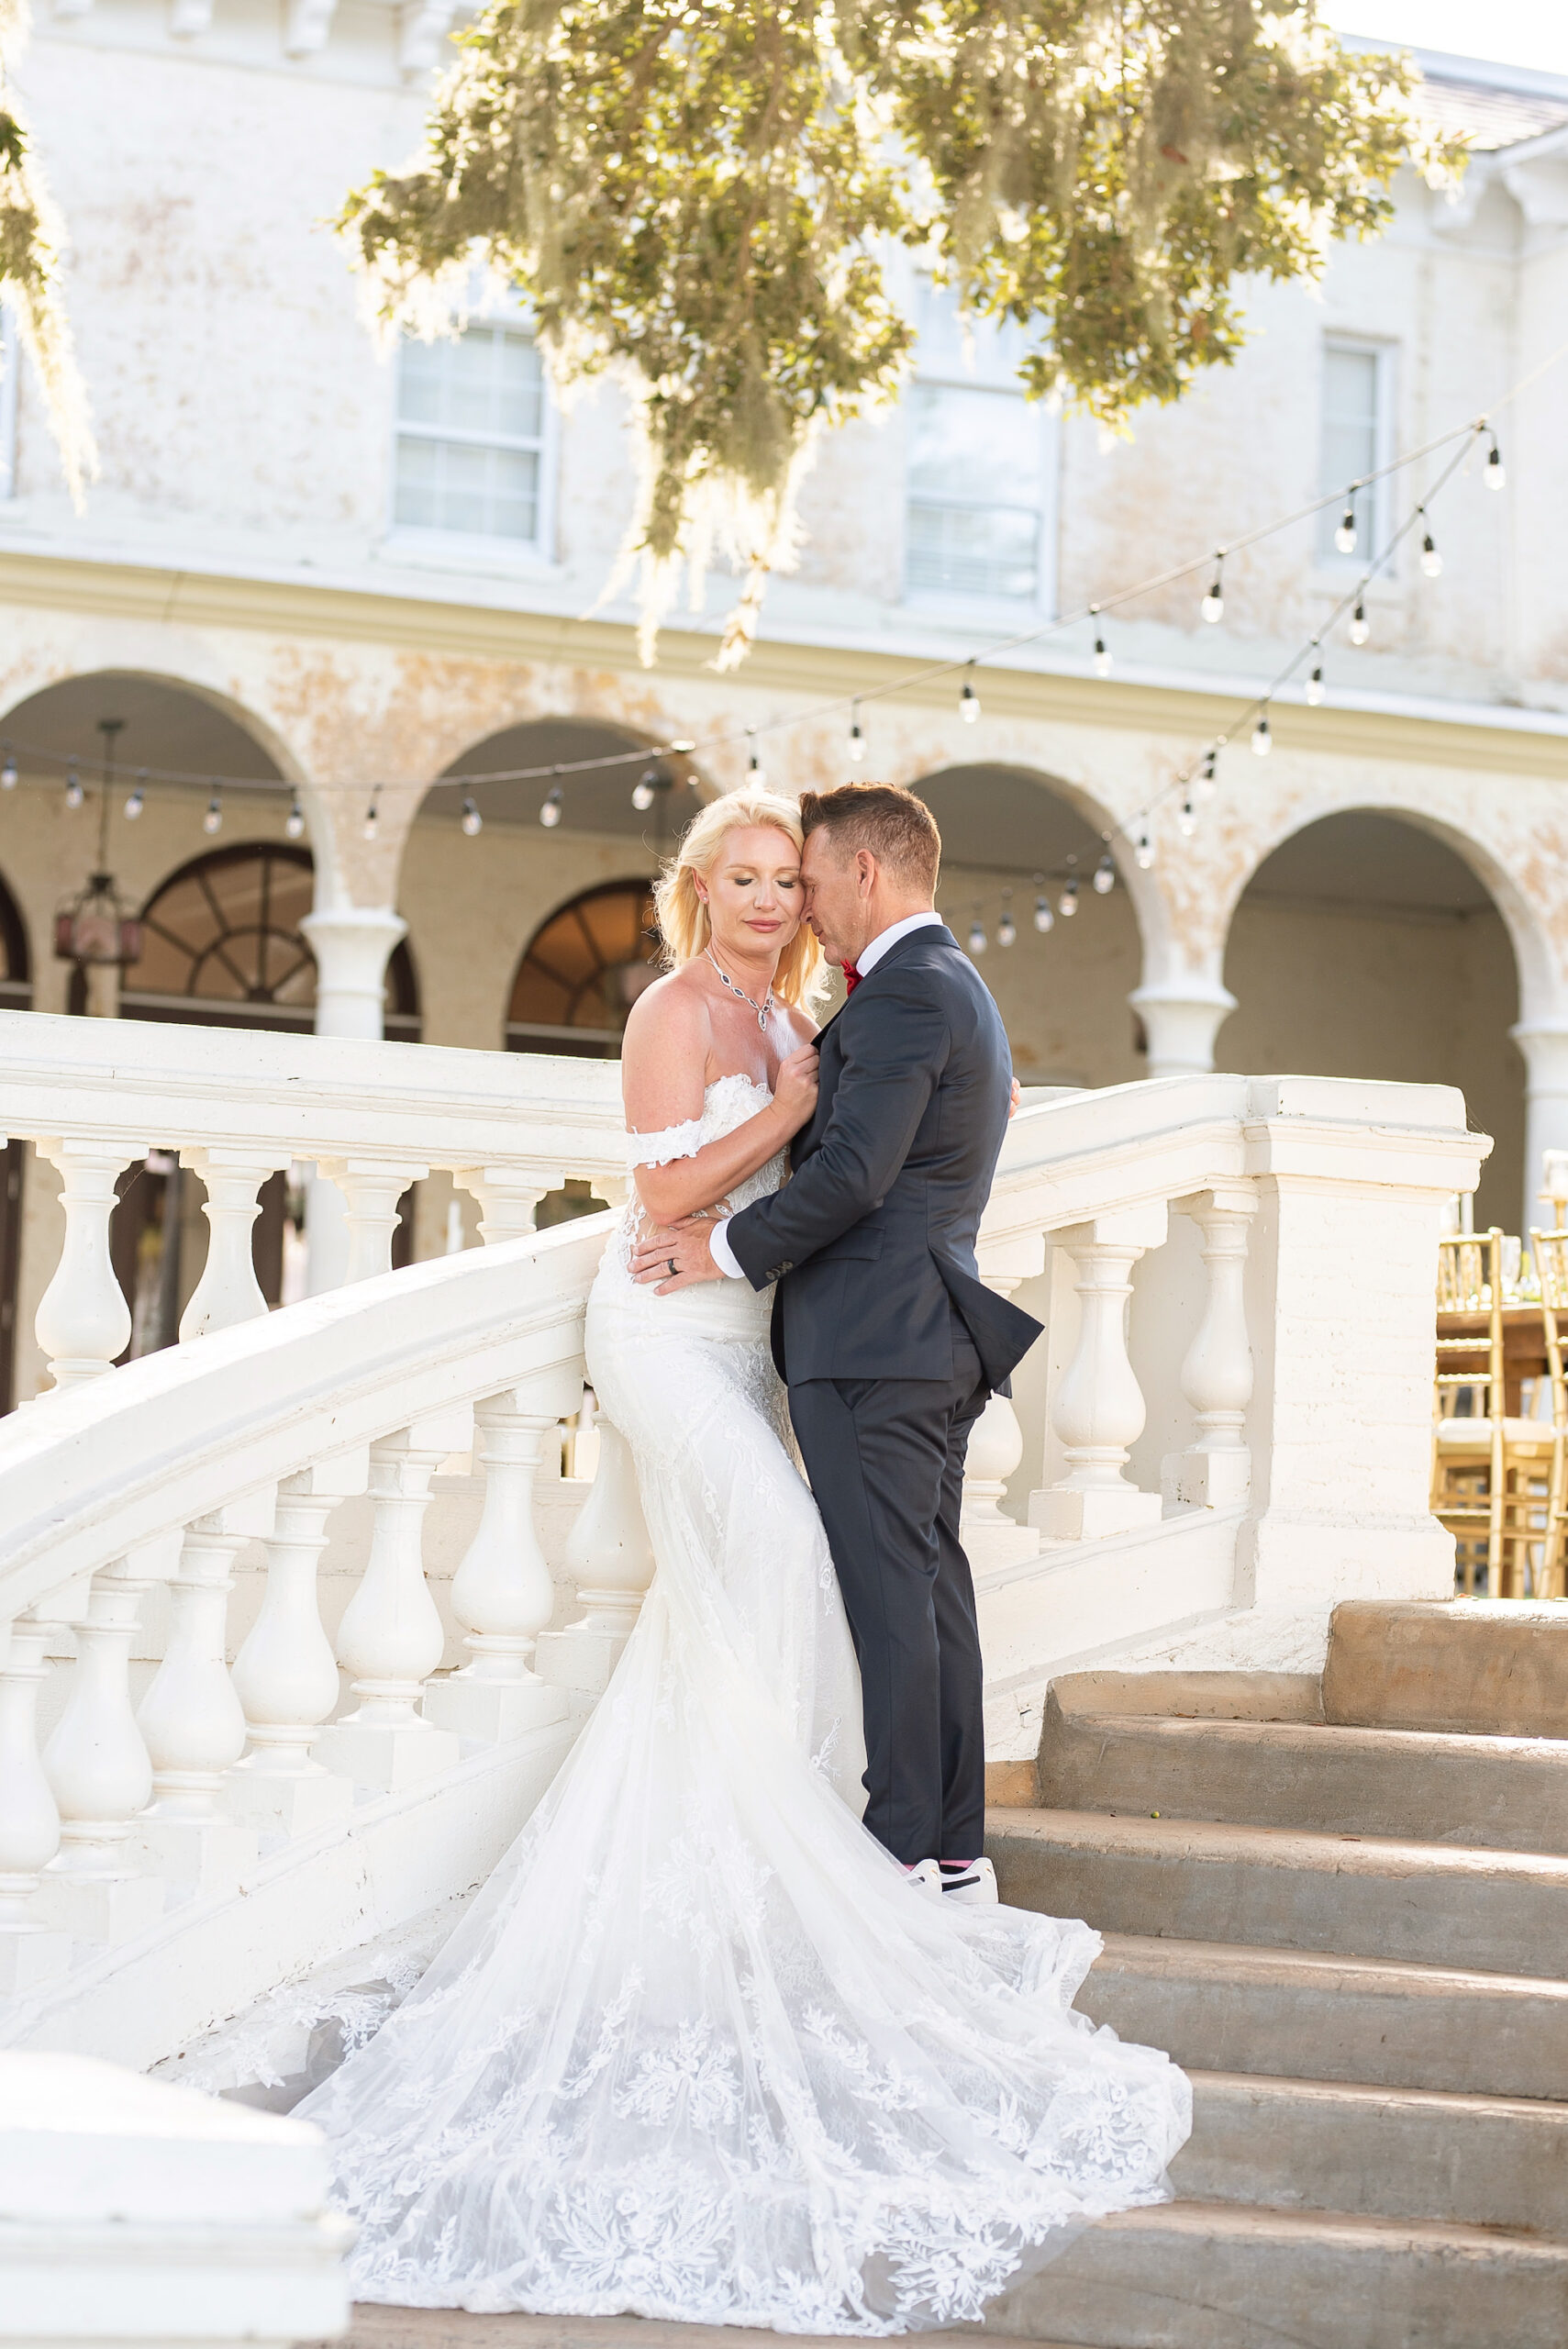 Outdoor Bride and Groom Wedding Portrait on Stairs at Italian Inspired Setting in Central Florida | Venue Bella Cosa | Tampa Bay Wedding Photographer Kristen Marie Photography